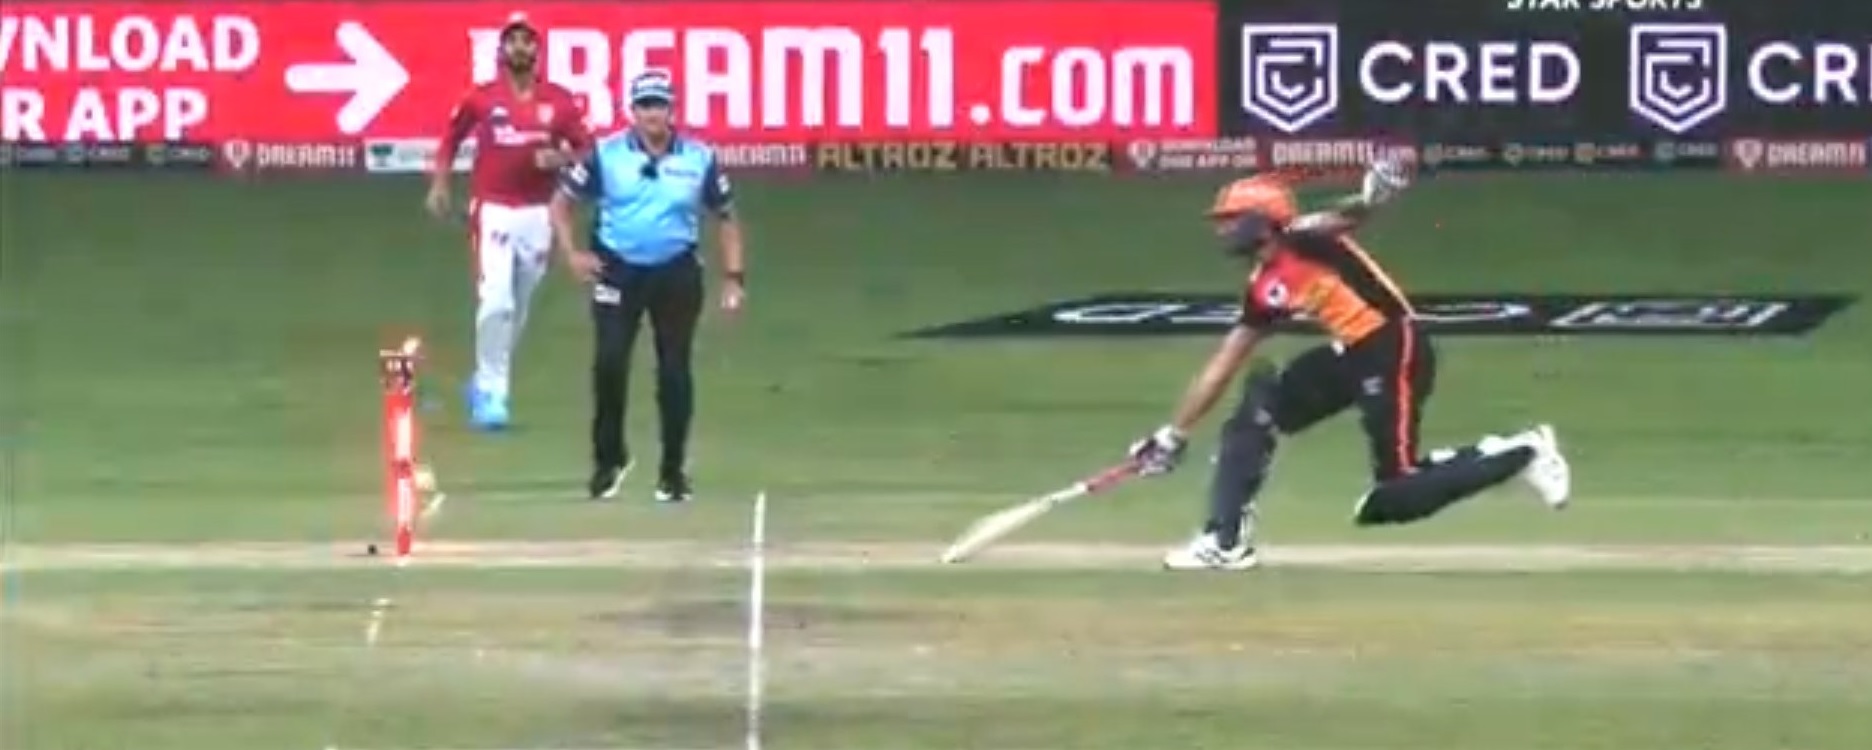 Ahmed refused runs when SRH needed 13-odd runs in the last over and then got run out